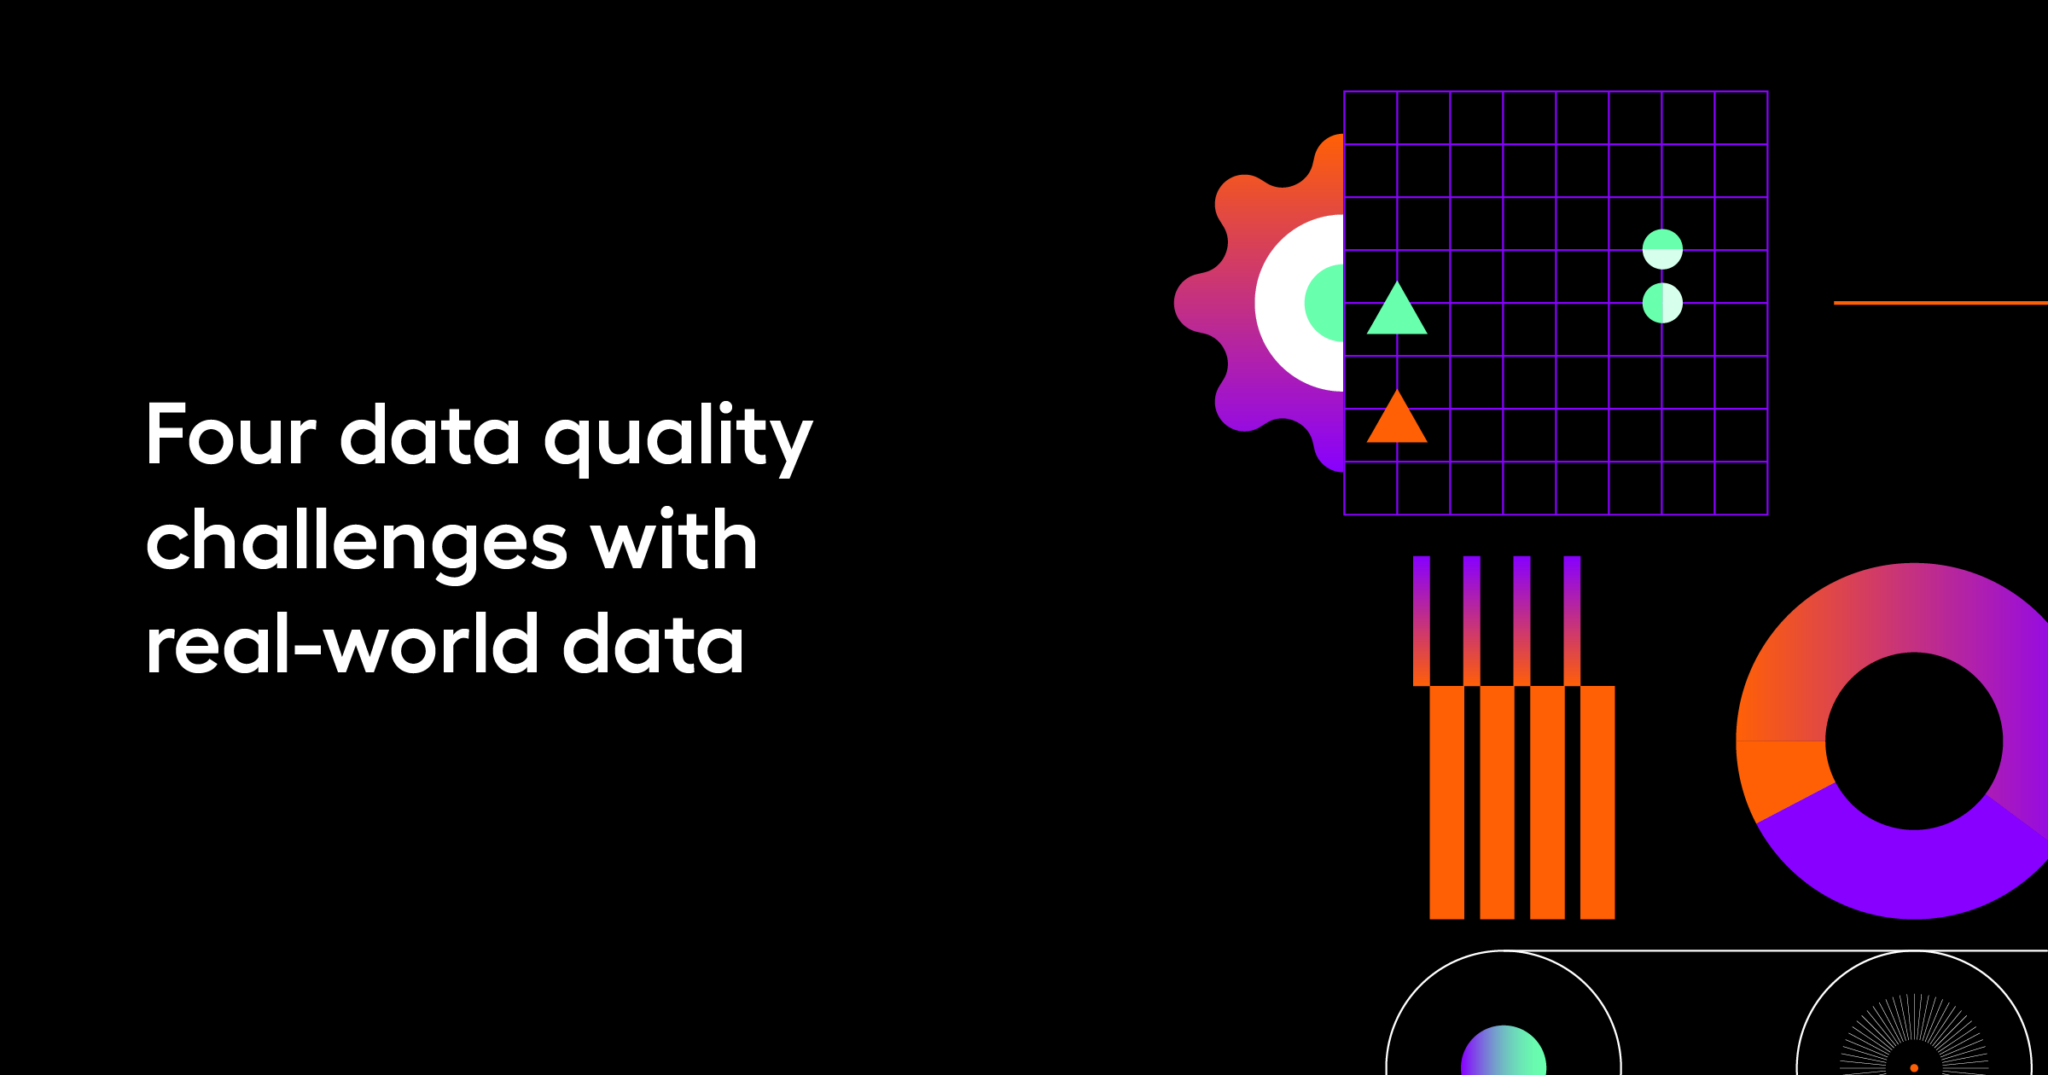 Four data quality challenges with real-world data